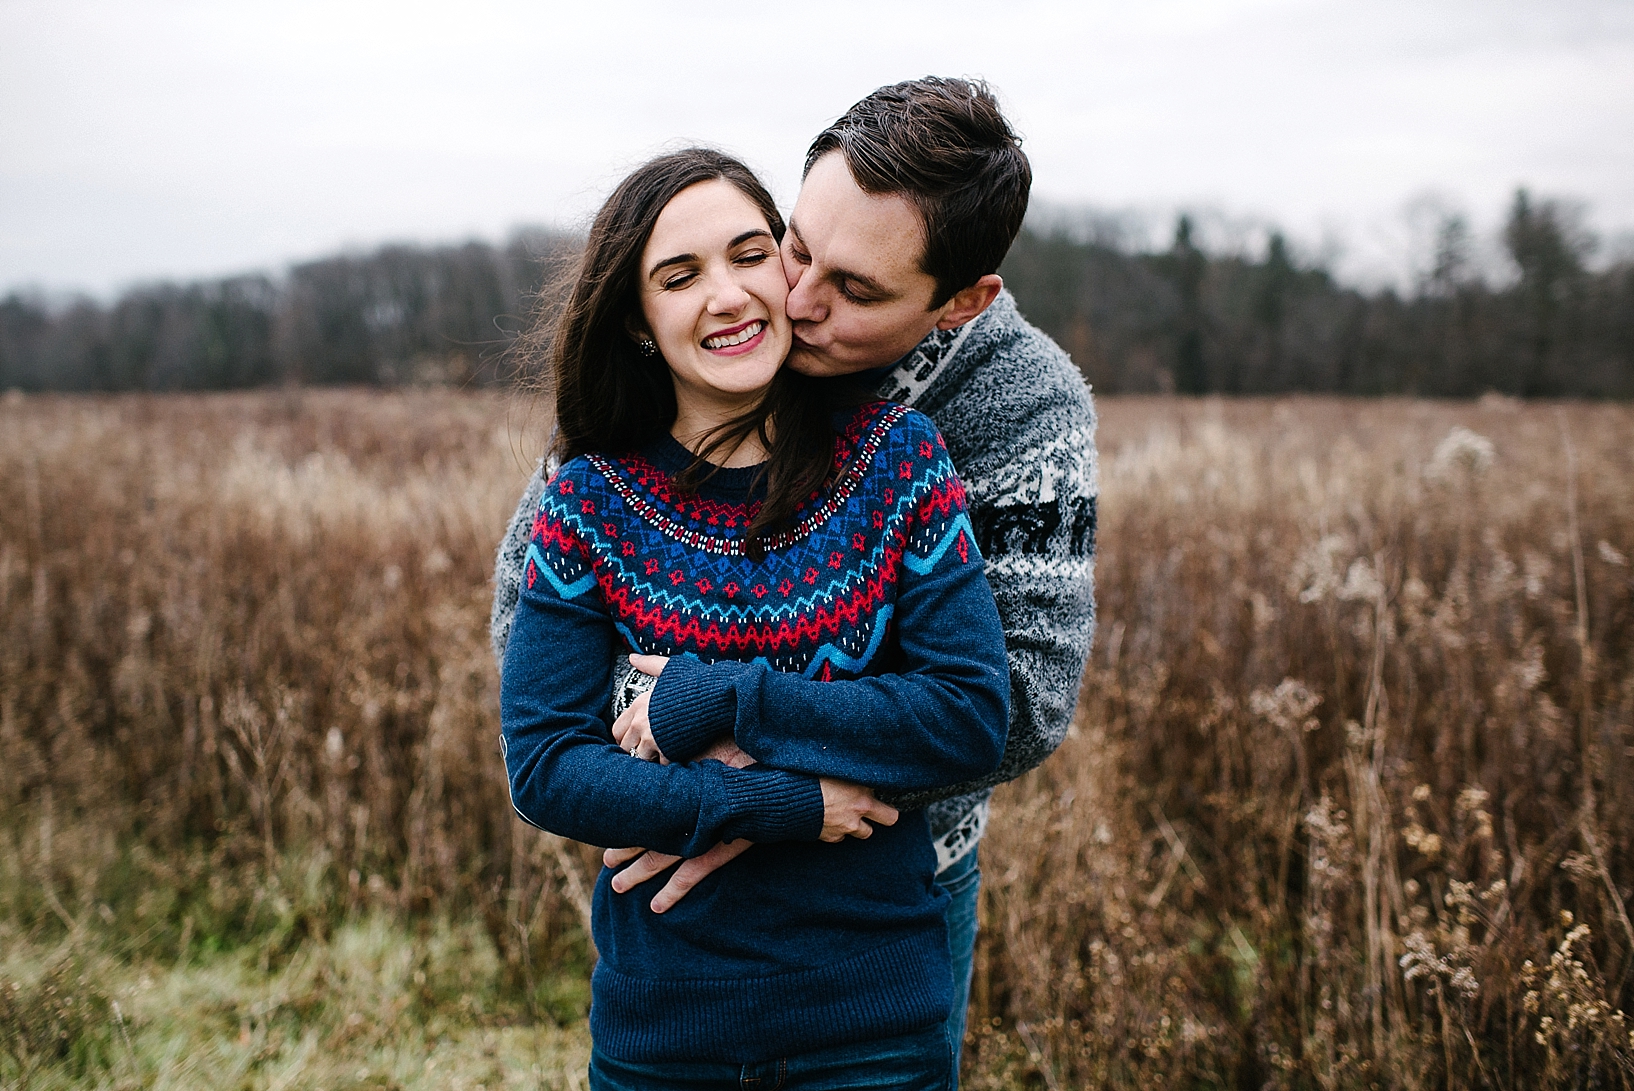 guy in grey sweater kissing girl in blue sweater on the cheek while she smiles